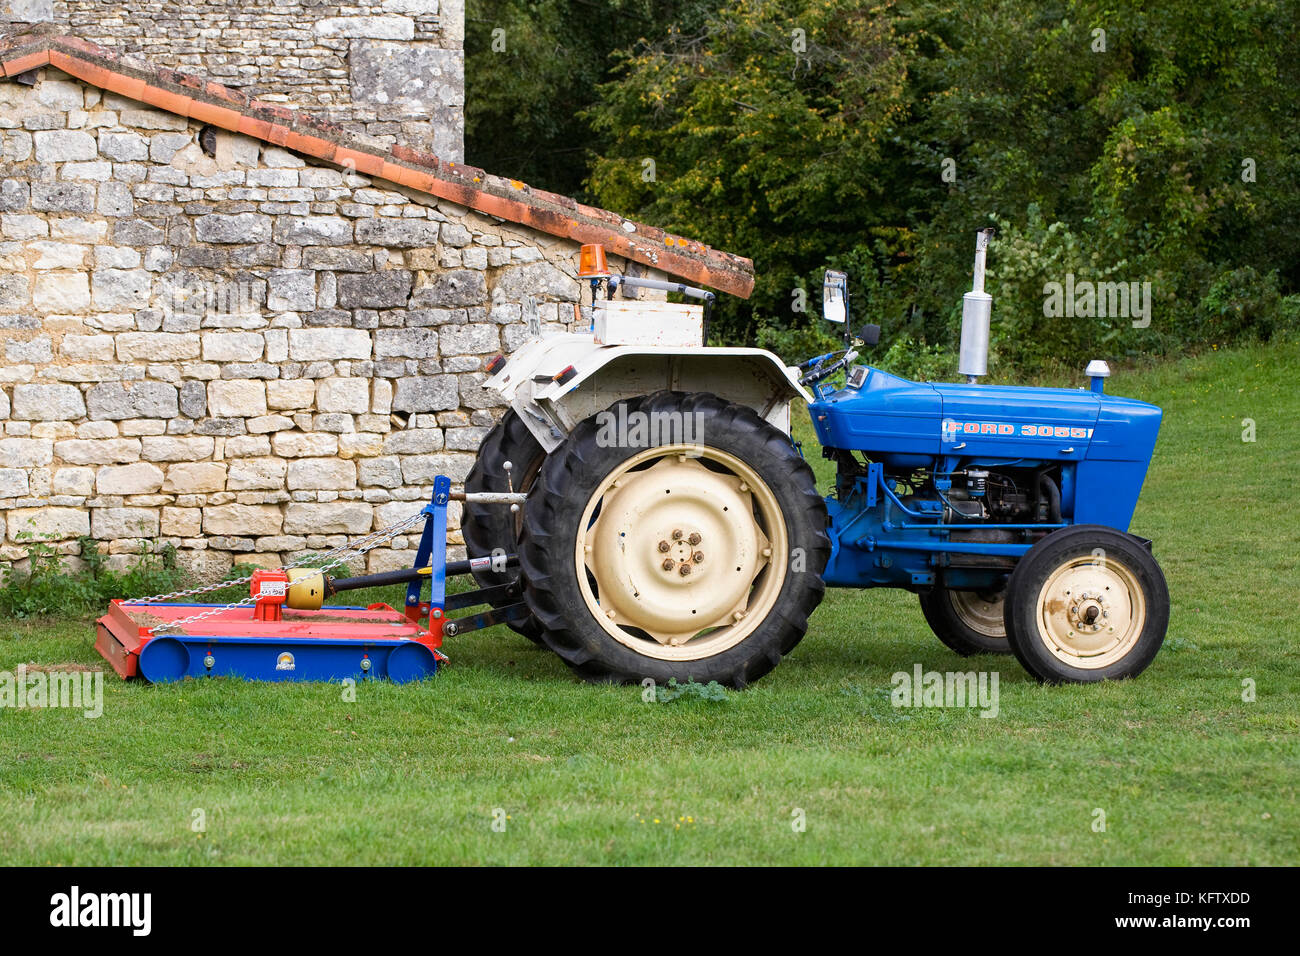 Rotary Lawn Mower attached to a small tractor. Stock Photo